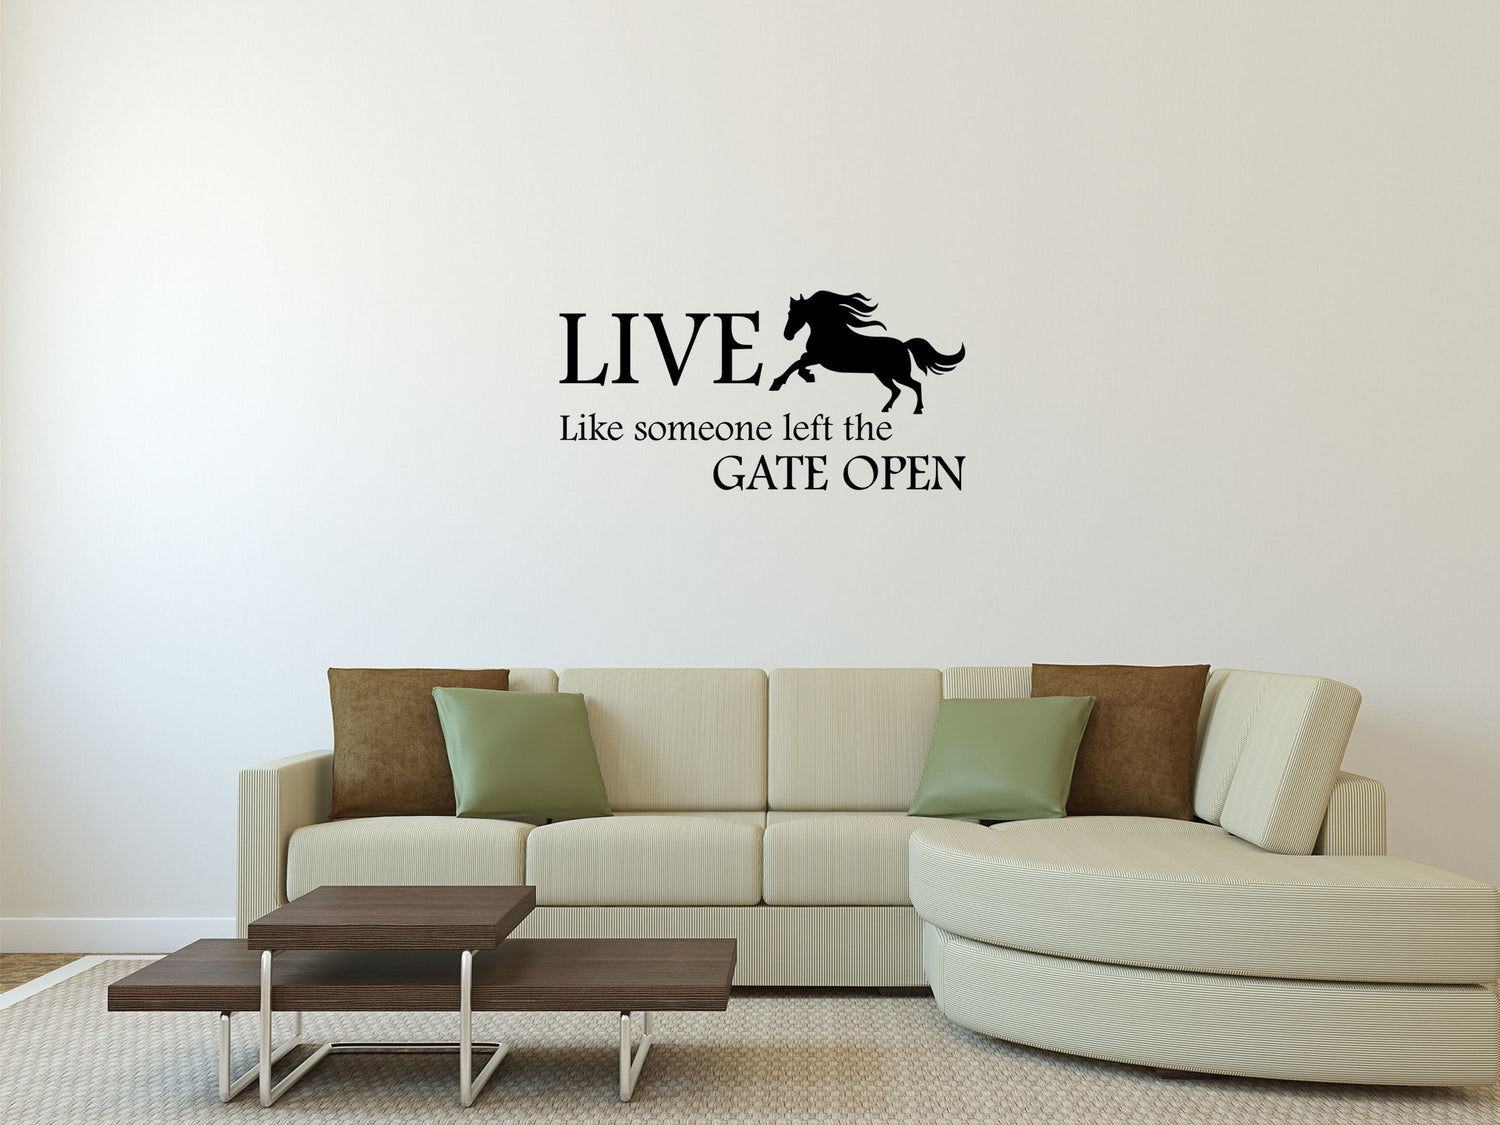 Live Like Someone Left The Gate Open Vinyl Wall Decal Inspirational Wall Signs 